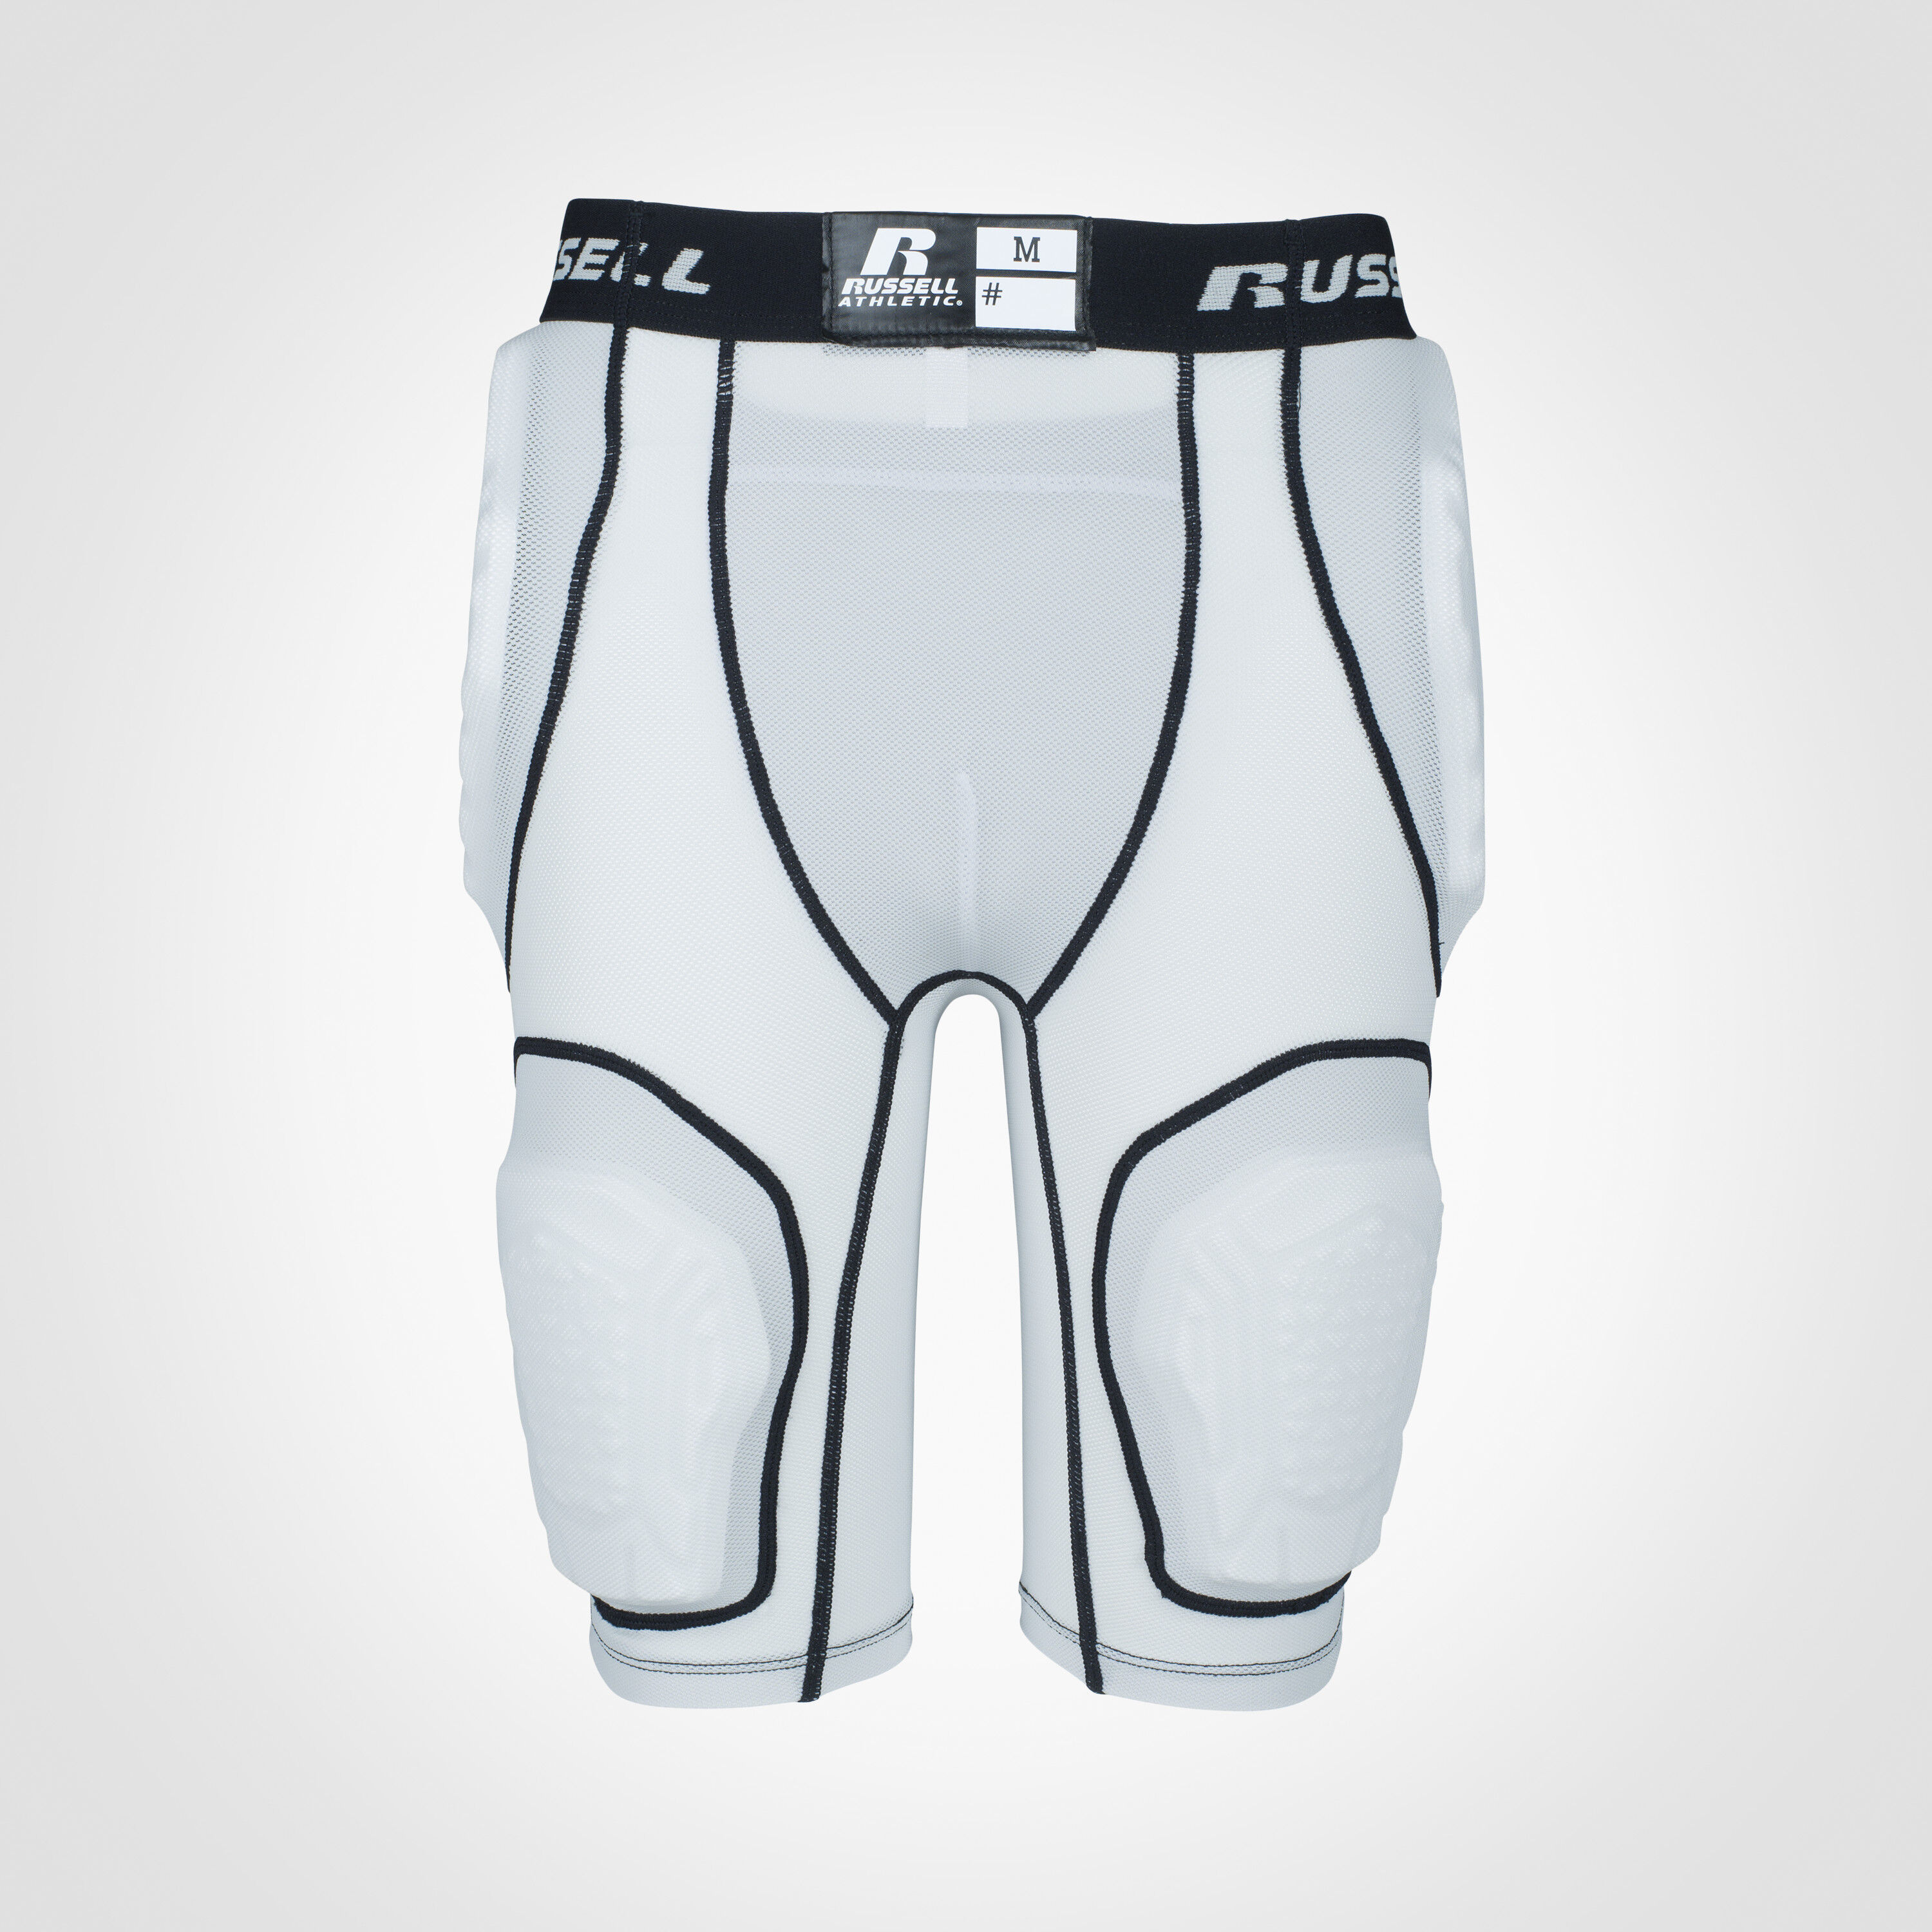 S Details about   Russell Football Girdle Padded Compression Shorts ~ White ~ Youth Boy's Size 